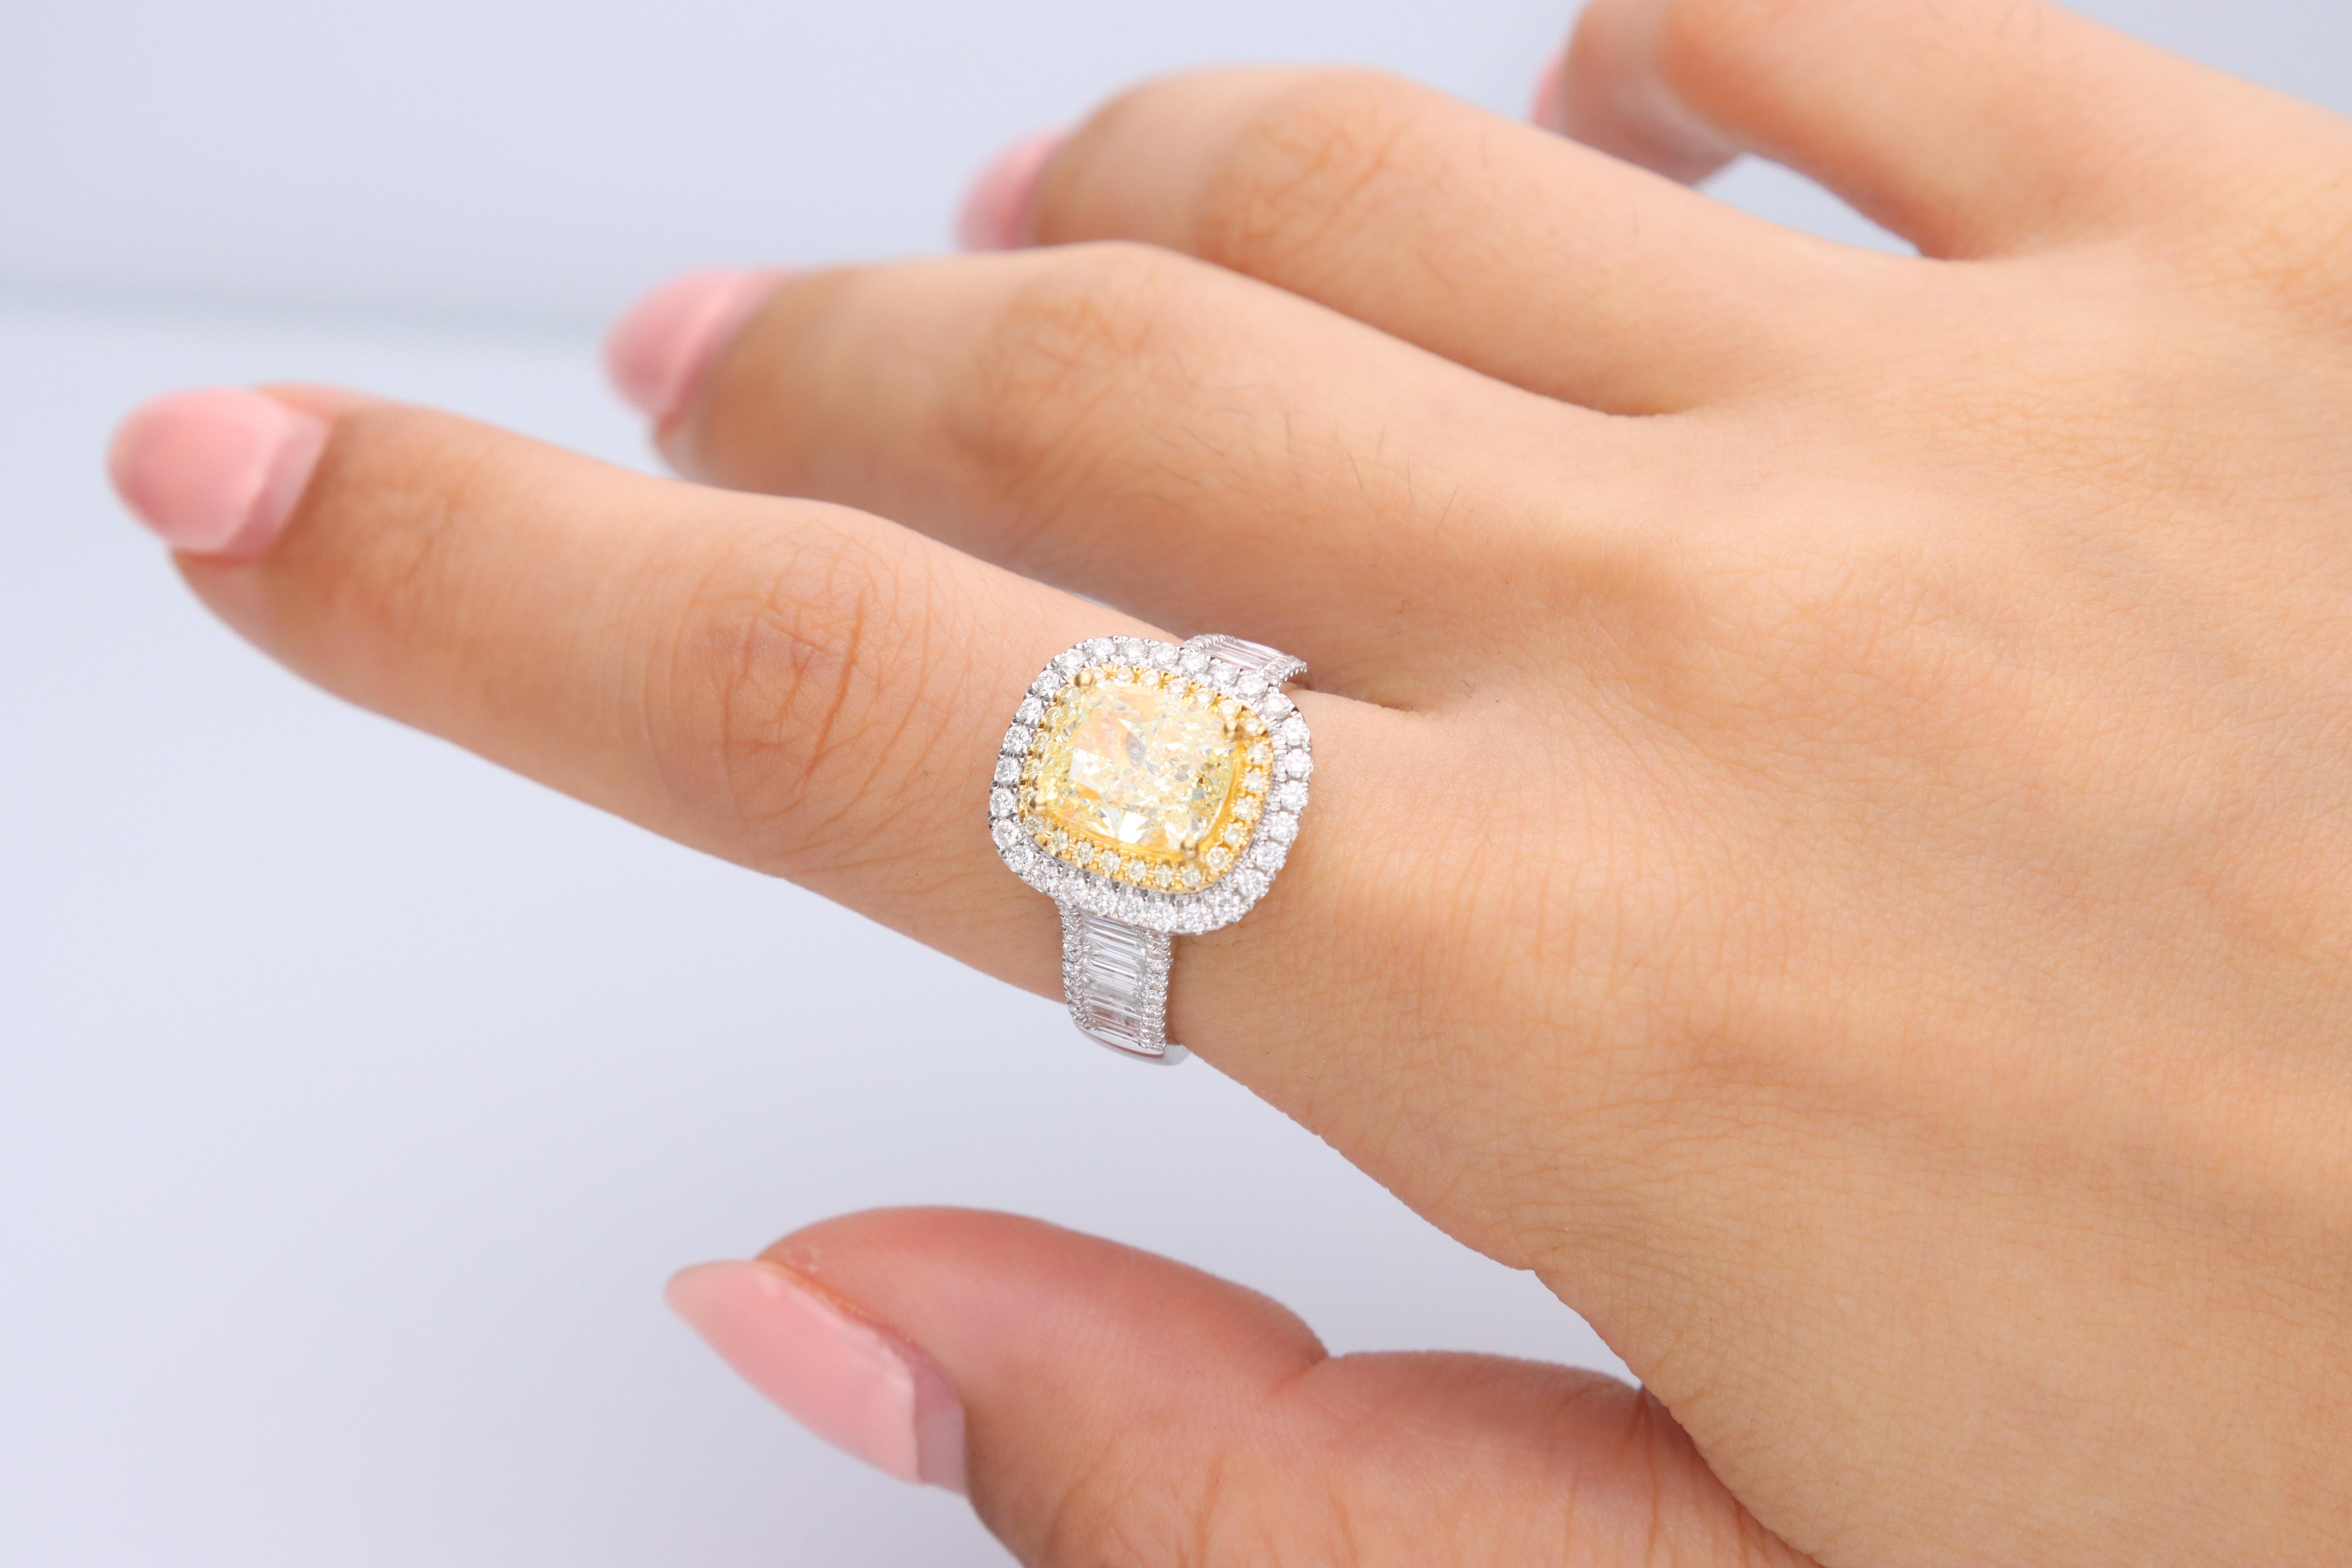 Stunning, timeless and classy eternity Unique Ring. Decorate yourself in luxury with this Gin & Grace Ring. The 18K Two Tone Gold jewelry boasts with Cushion-cut 1 pcs 3.01 carat, Round-cut 24 pcs 0.12 carat Yellow Diamond and Natural Round-cut